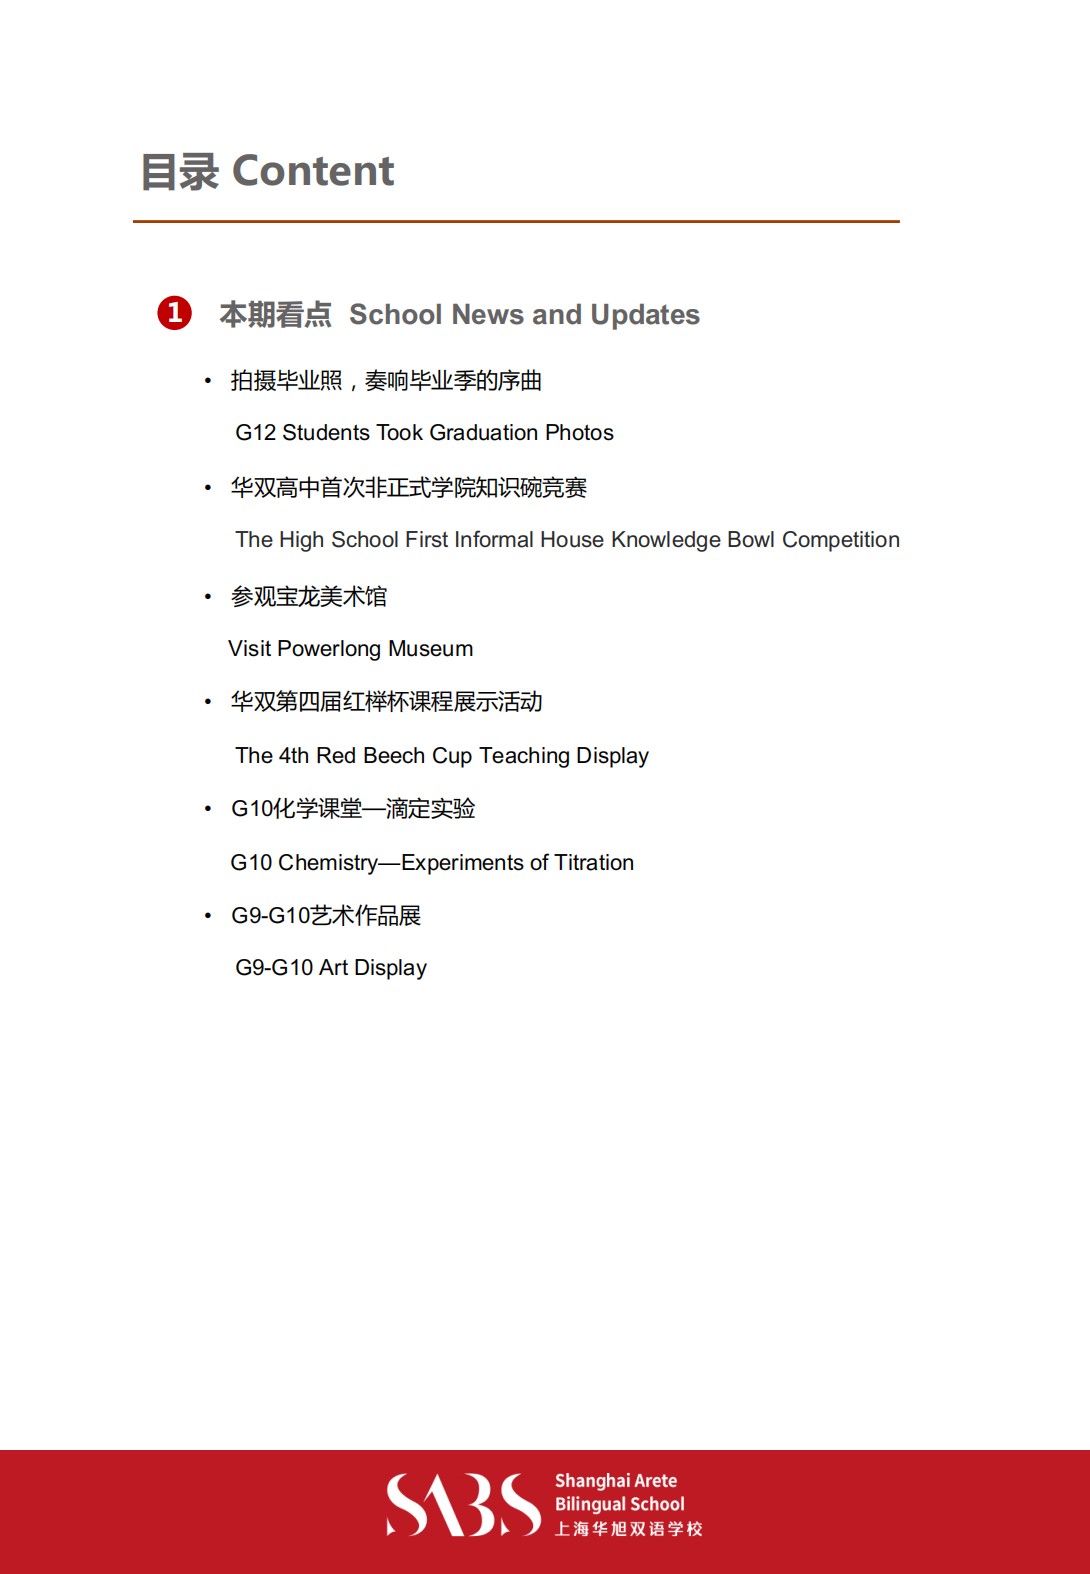 HS 7th Issue Newsletter pptx（English)_01.png